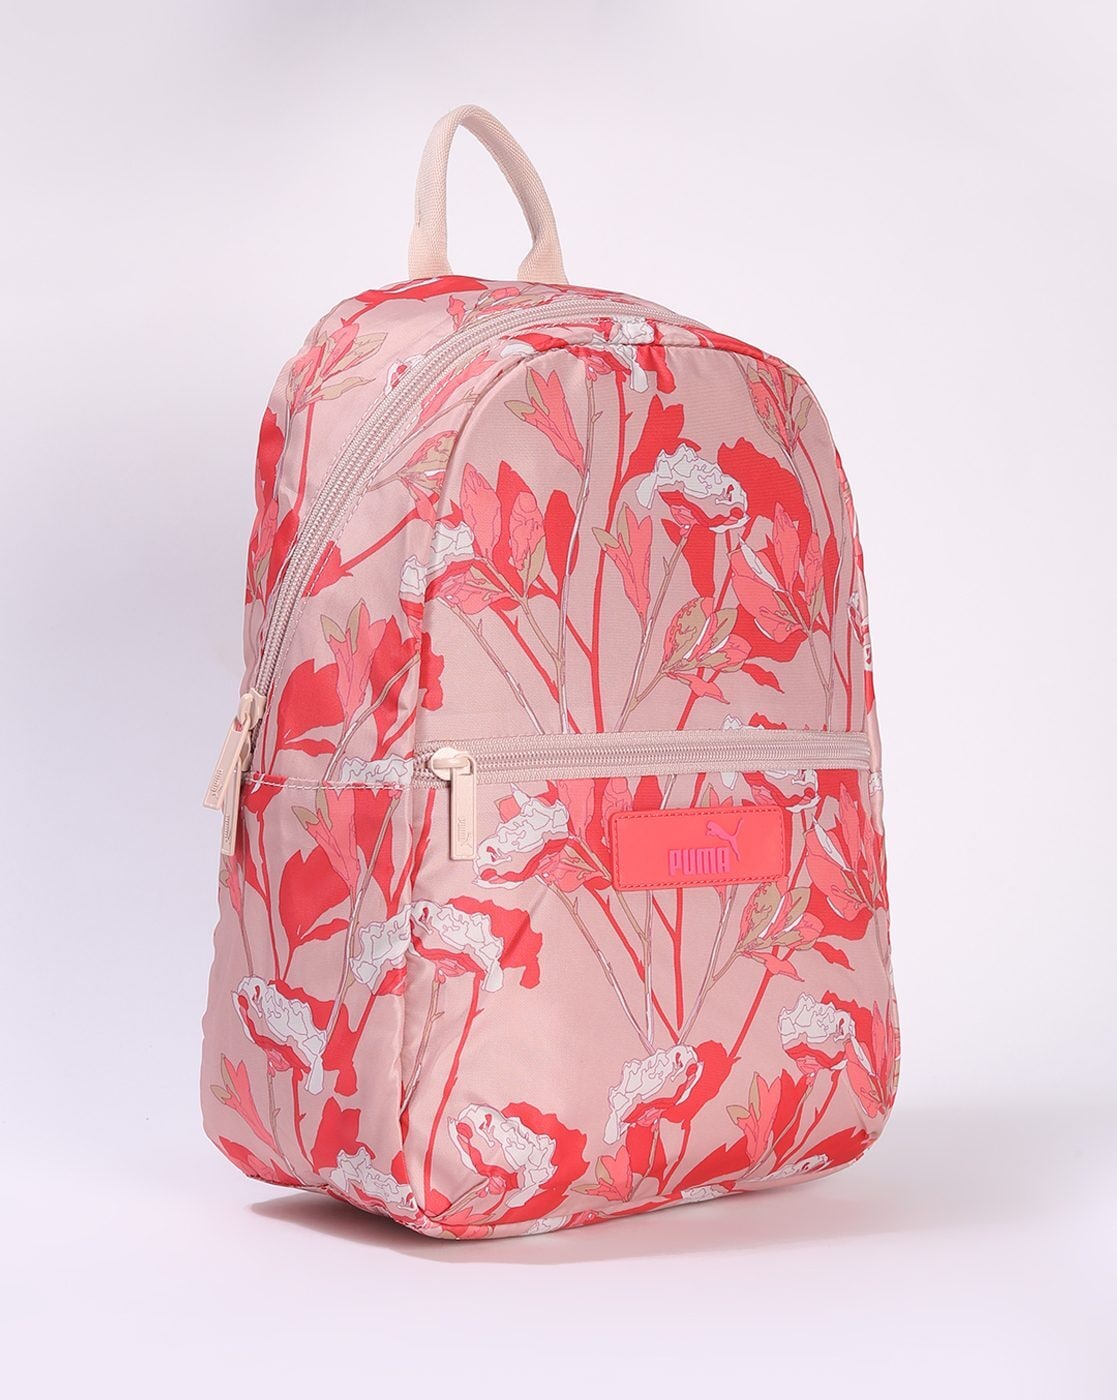 Pink Floral Classic Backpack, Small Medium Large, Interior Laptop